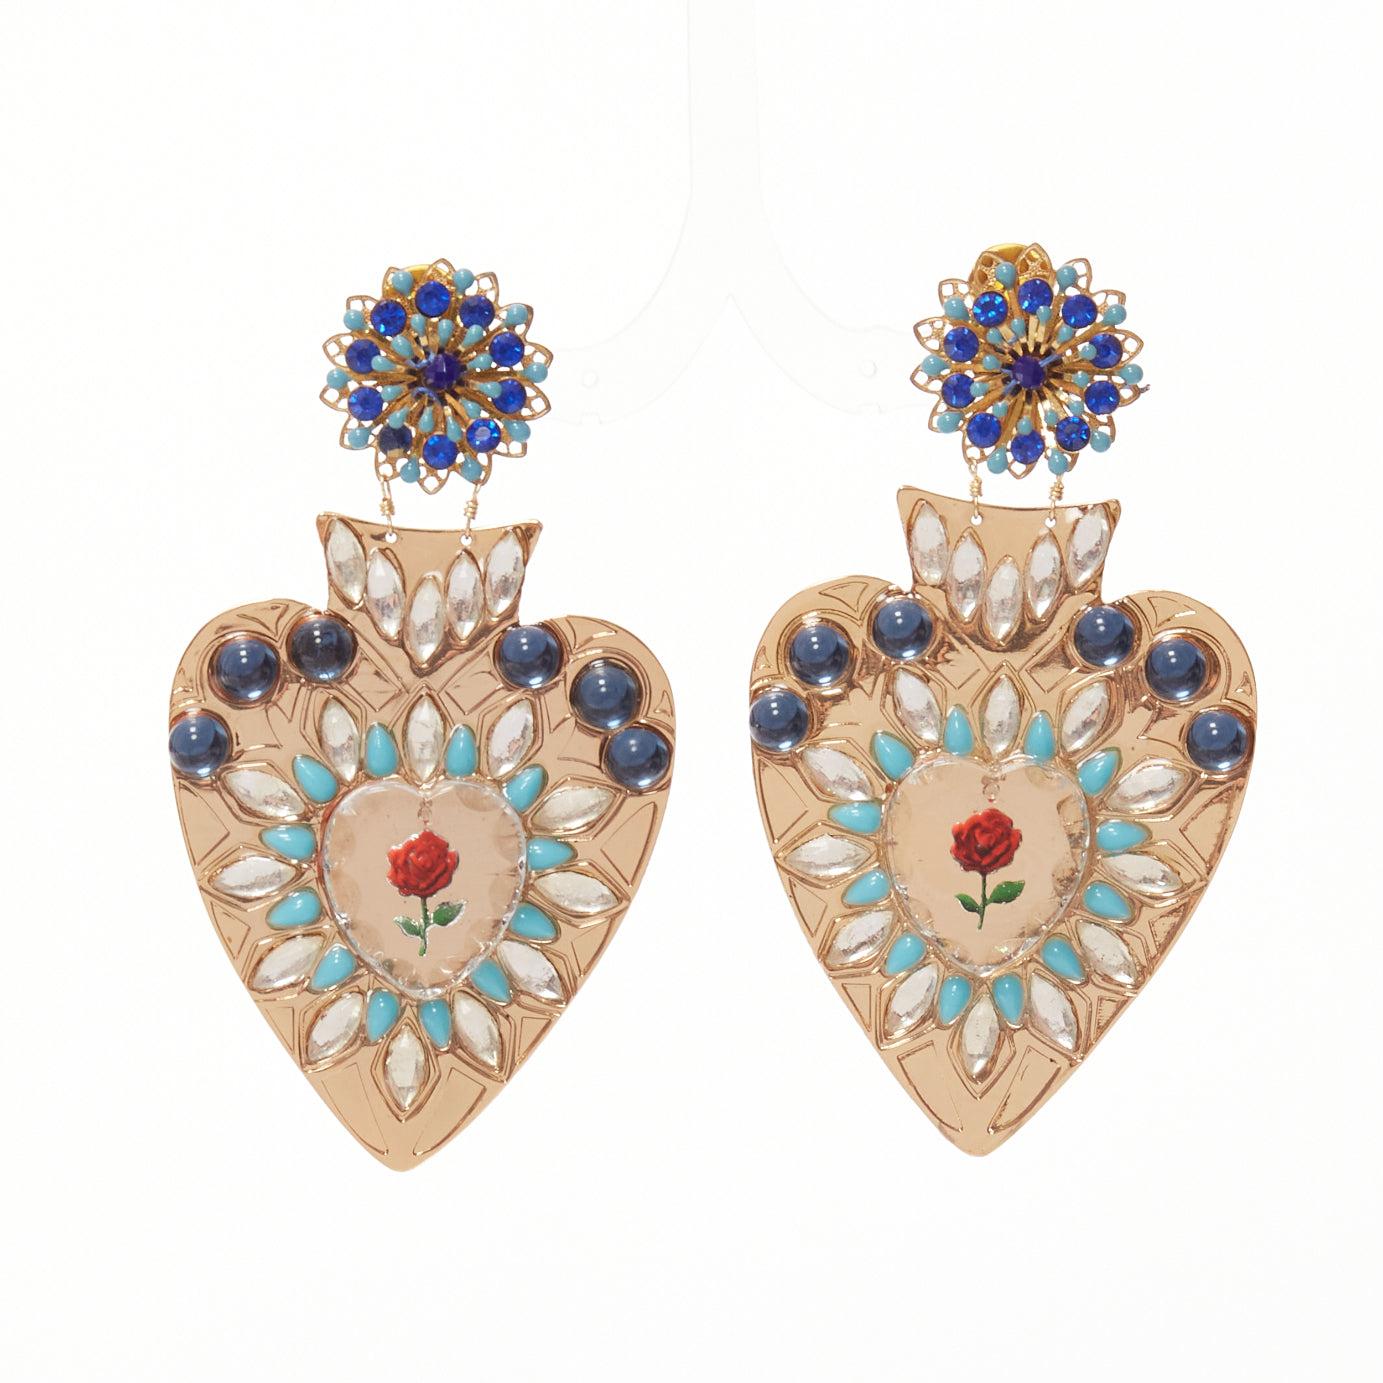 MERCEDES SALAZAR blue red heart resin crystal rose dangling clip on earrings
Reference: AAWC/A01224
Brand: Mercedes Salazar
Material: Metal
Color: Gold, Multicolour
Pattern: Crystals
Closure: Clip On
Lining: Gold Metal
Extra Details: Logo at back of